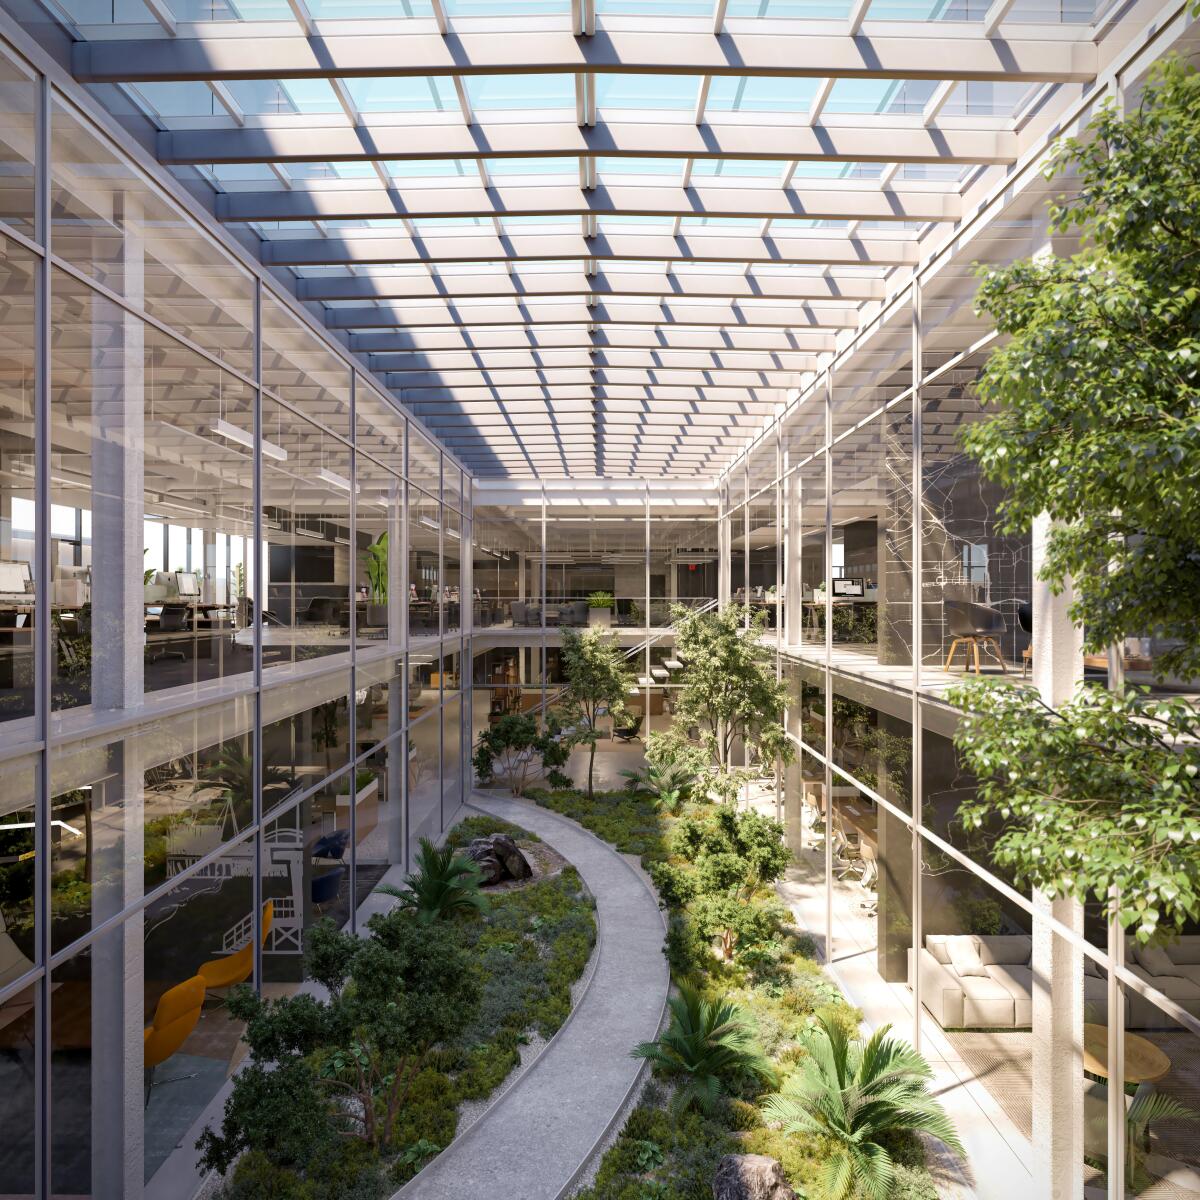 Rendering shows a walkway through plants and trees in a sunny atrium area of an office building